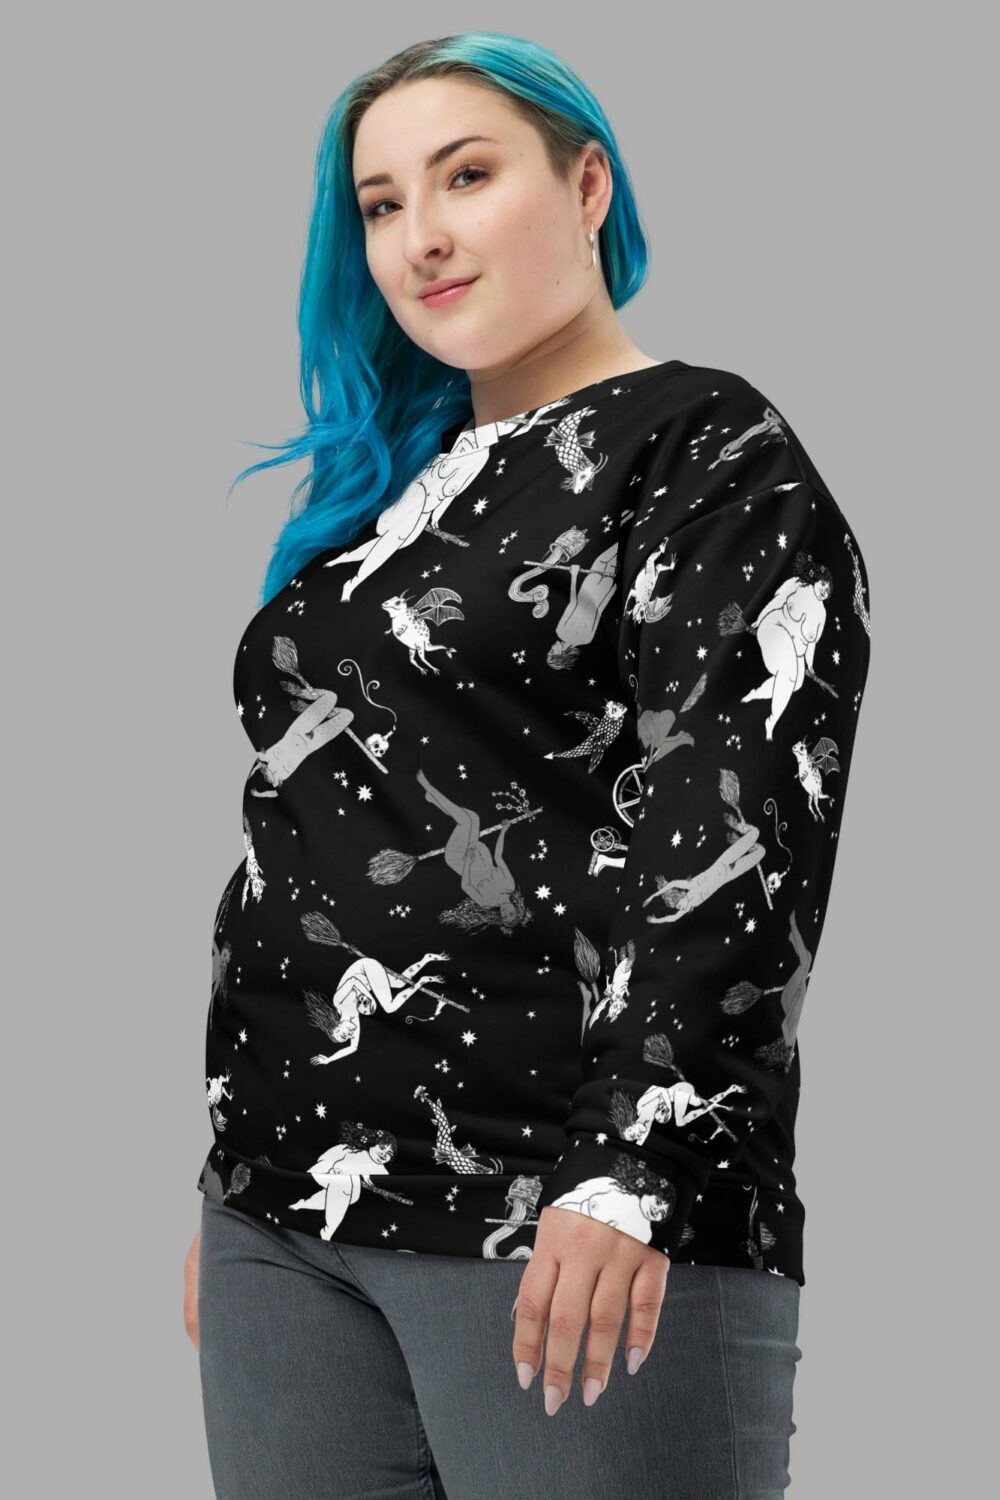 cosmic drifters intersectional witches print sweater side2